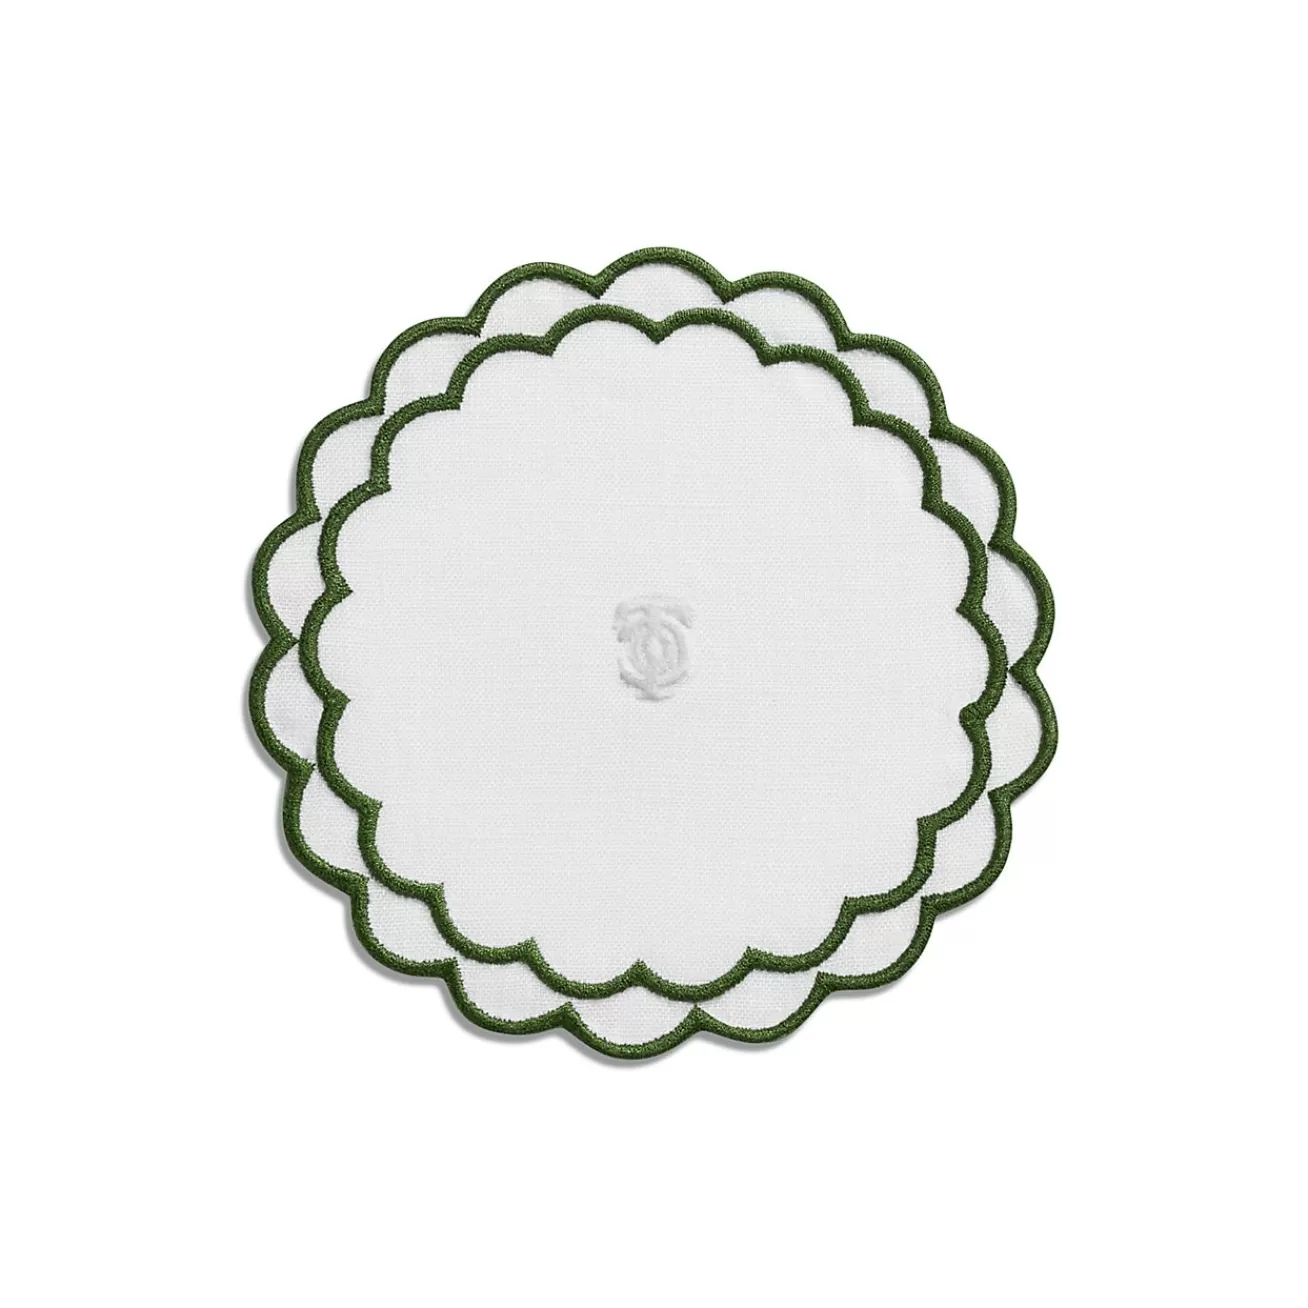 Tiffany & Co. Tiffany Home Essentials Scalloped Coasters in White Linen, Set of Four | ^ Decor | Table Linens